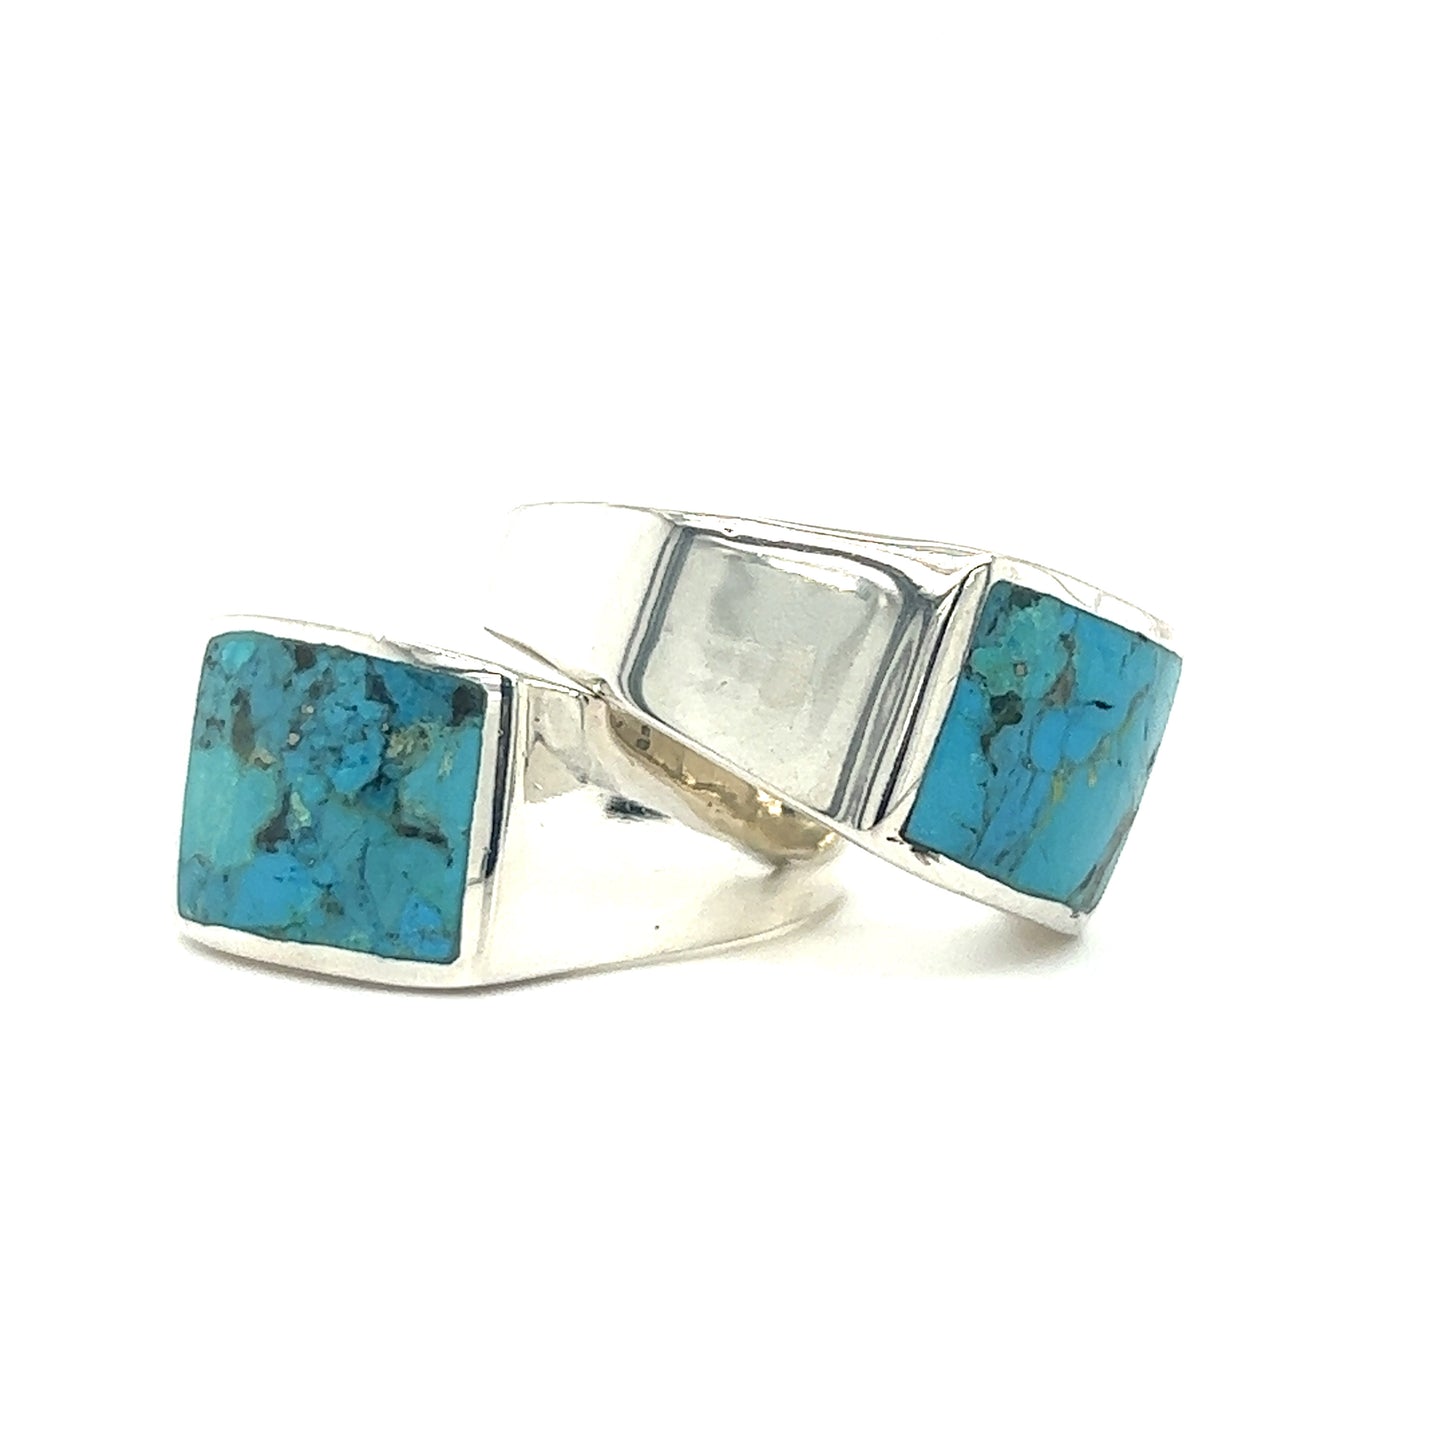 A pair of statement Super Silver Kingman Turquoise signet rings in sterling silver.